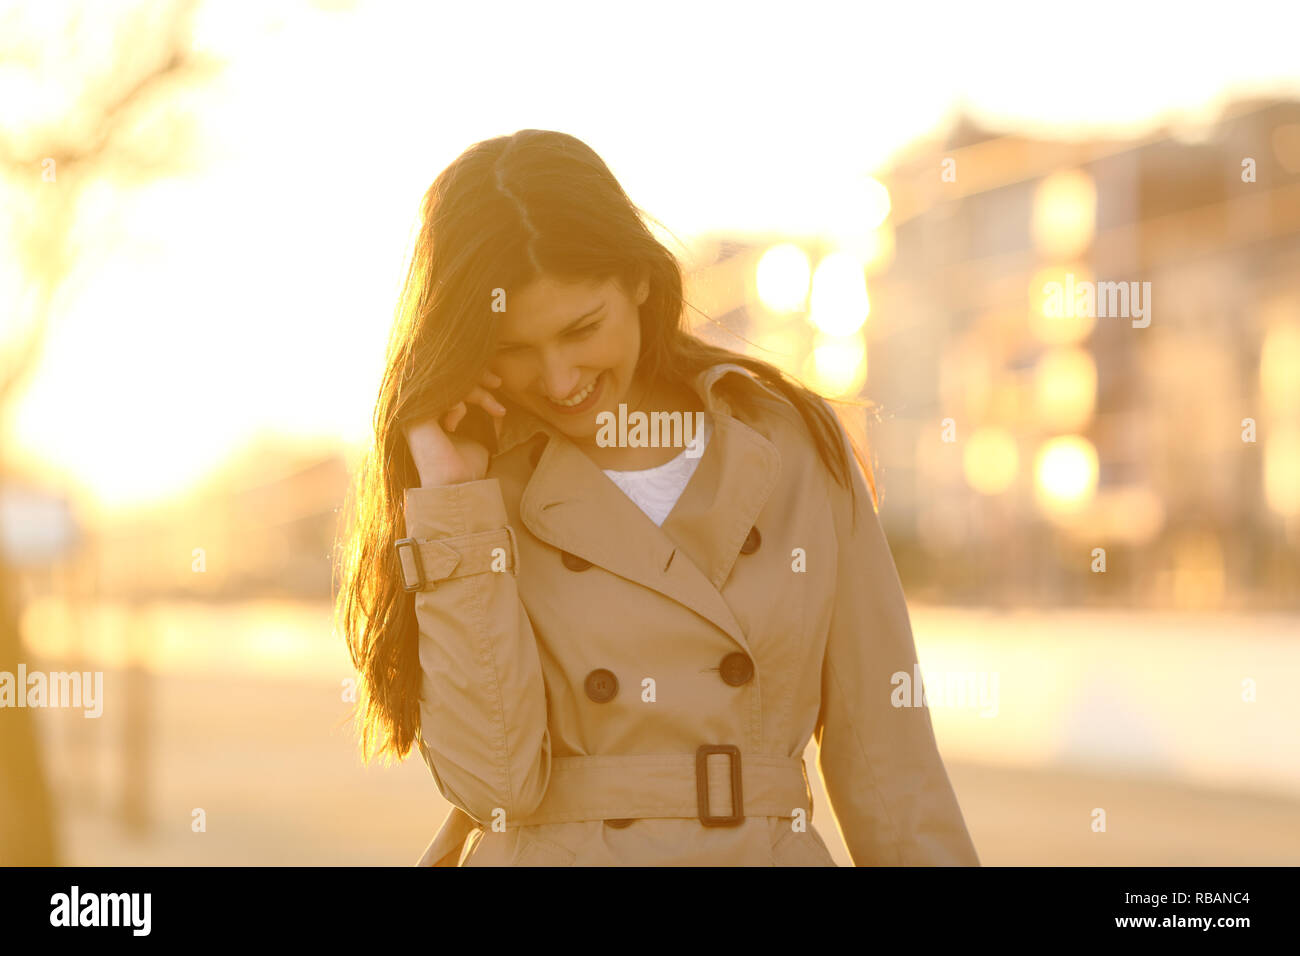 Front view portrait of a candid woman talking on phone at sunset in the street Stock Photo